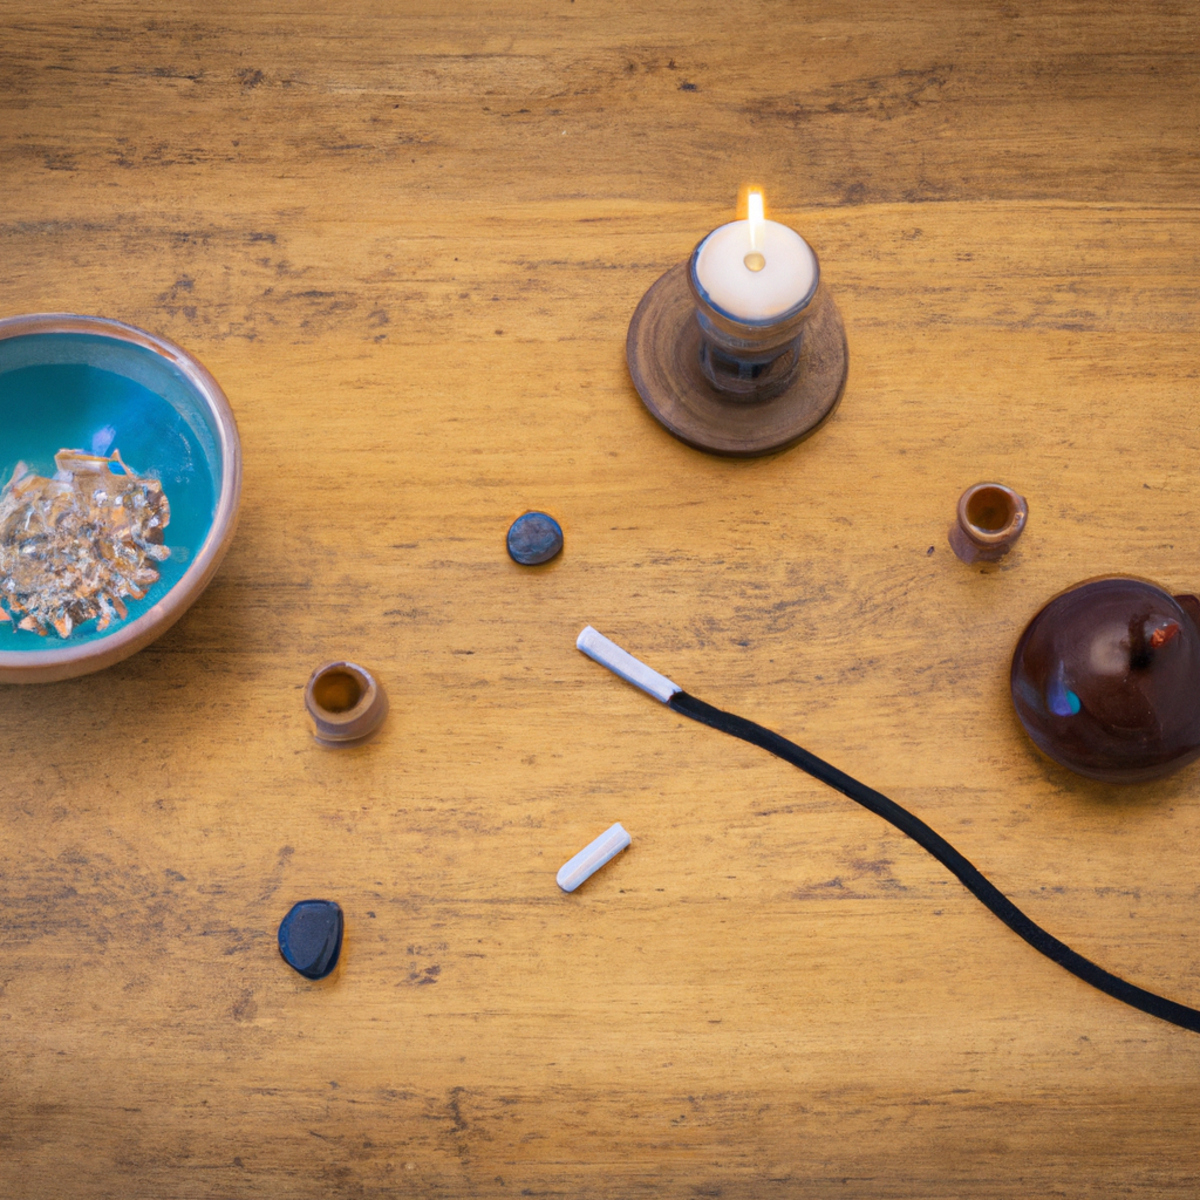 Mindfulness For Stress Reduction - A wooden table with a bowl of stones, incense holder, journal, and blurred figure meditating, promoting inner peace through mindfulness.